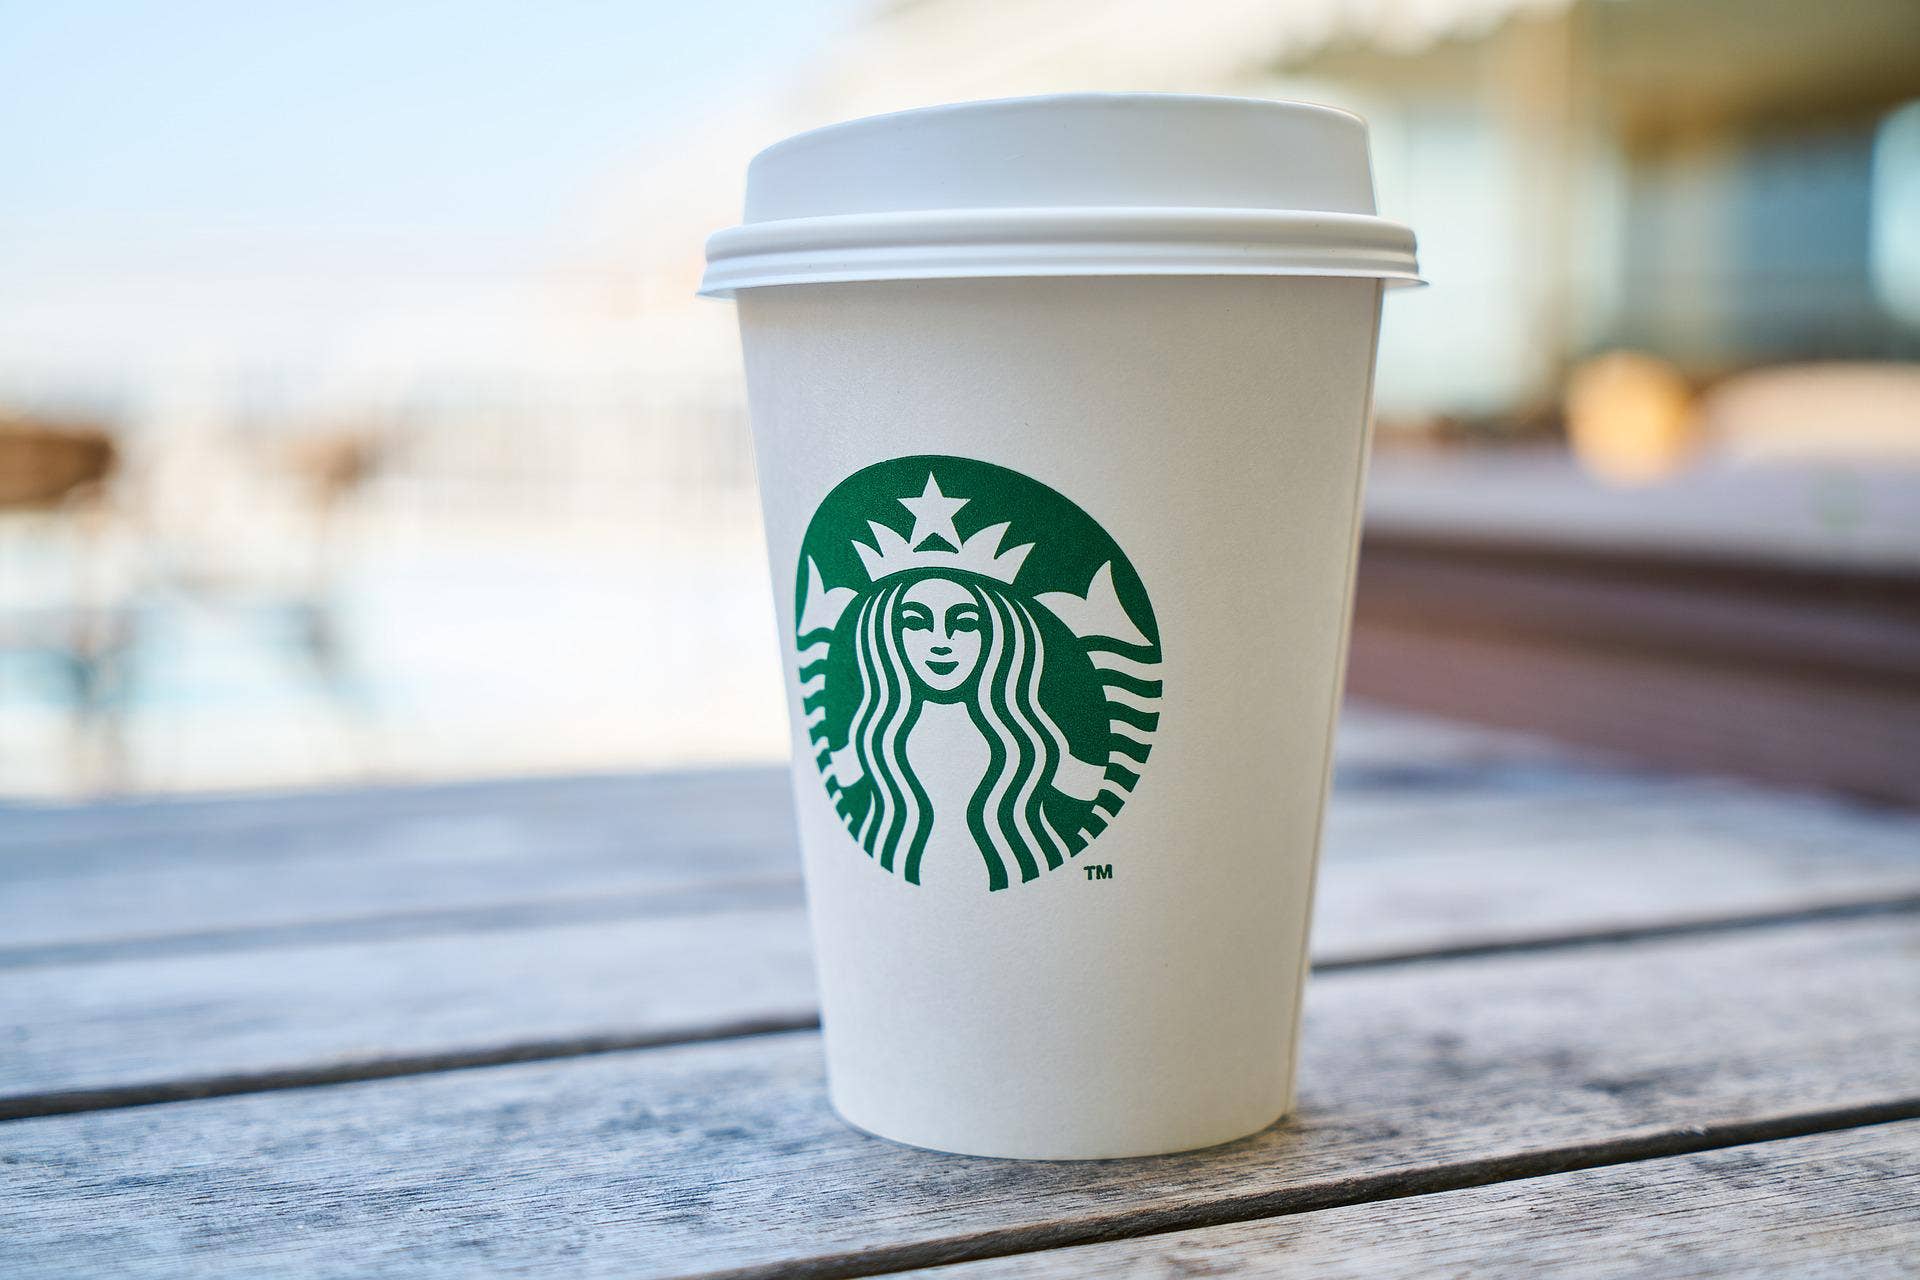 After-Hours Alert: Why Starbucks Stock Is Moving